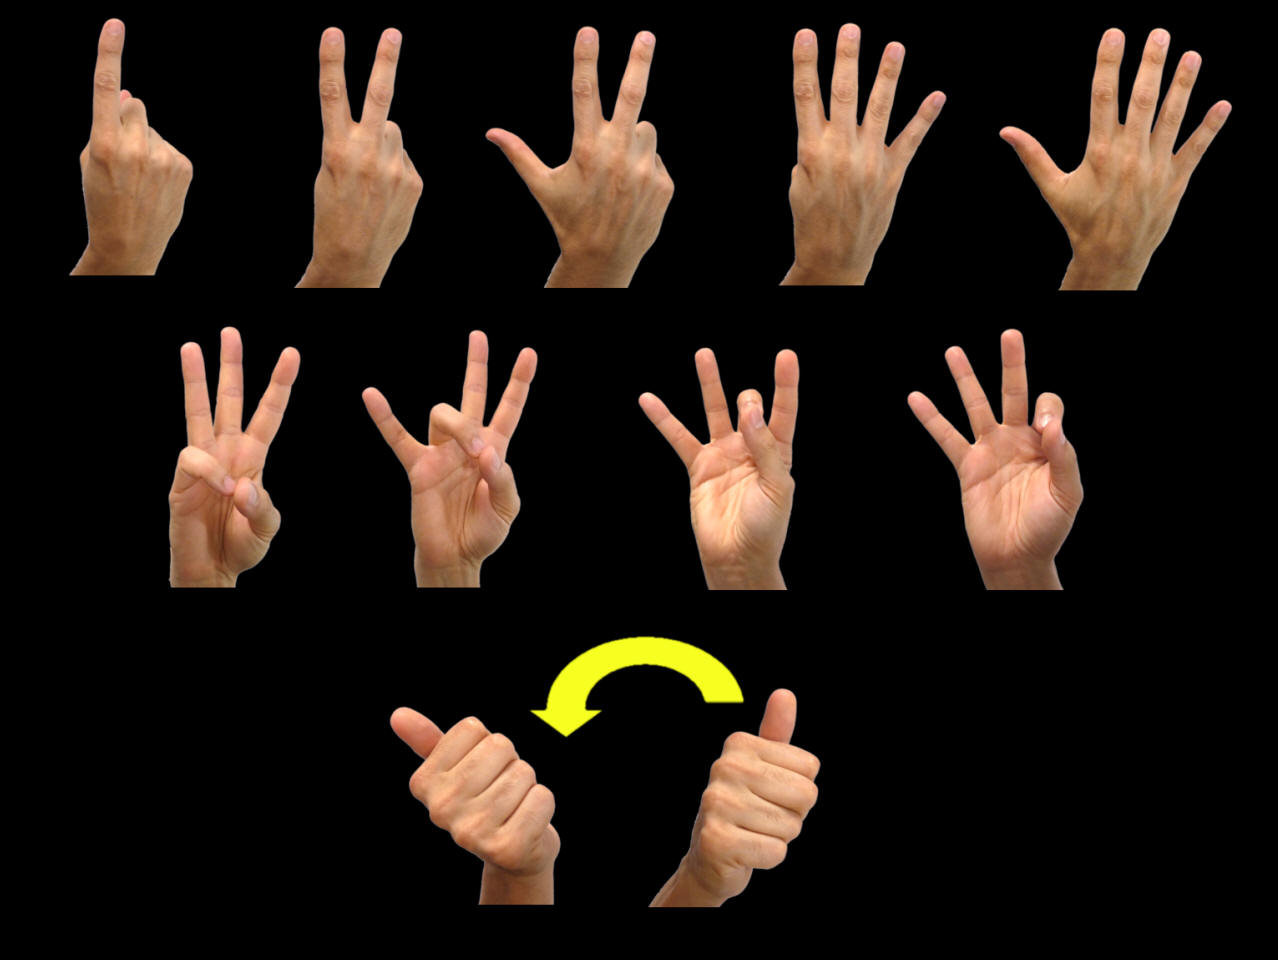 Sign Language Number Chart